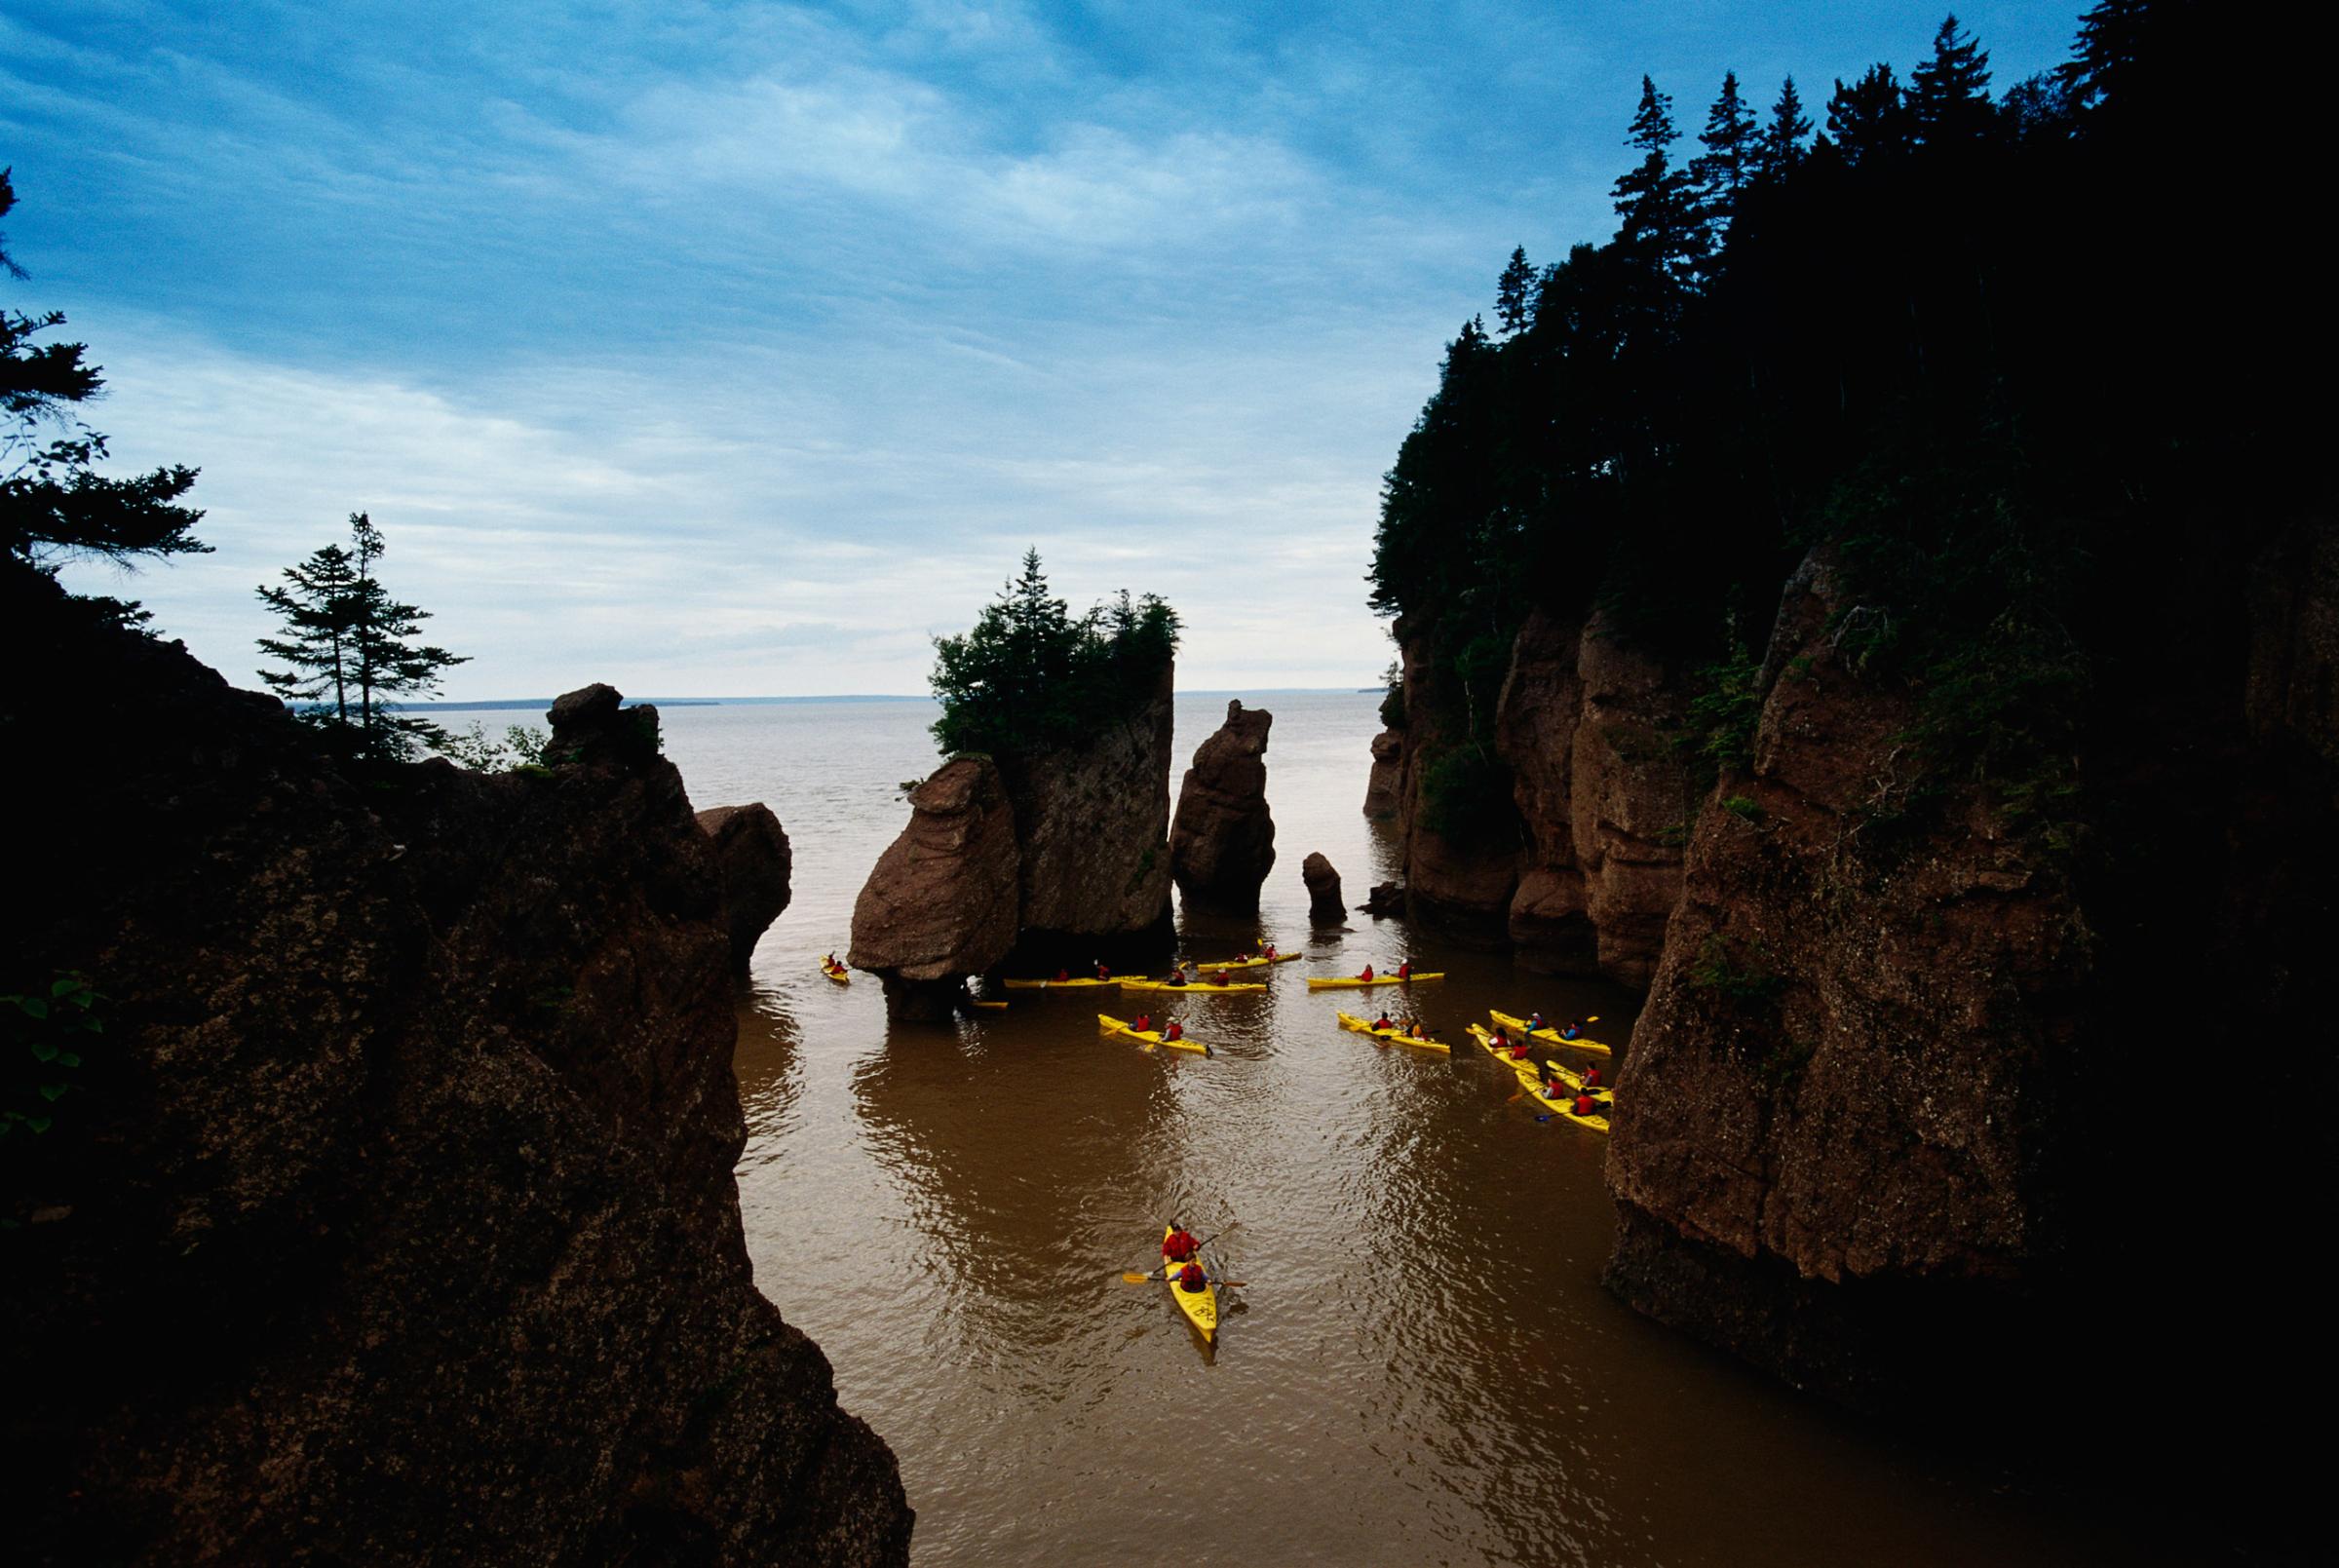 ca. 2002, New Brunswick, Canada, Canada --- Kayakers in the Bay of Fundy --- Image by © Richard T. Nowitz/CORBIS